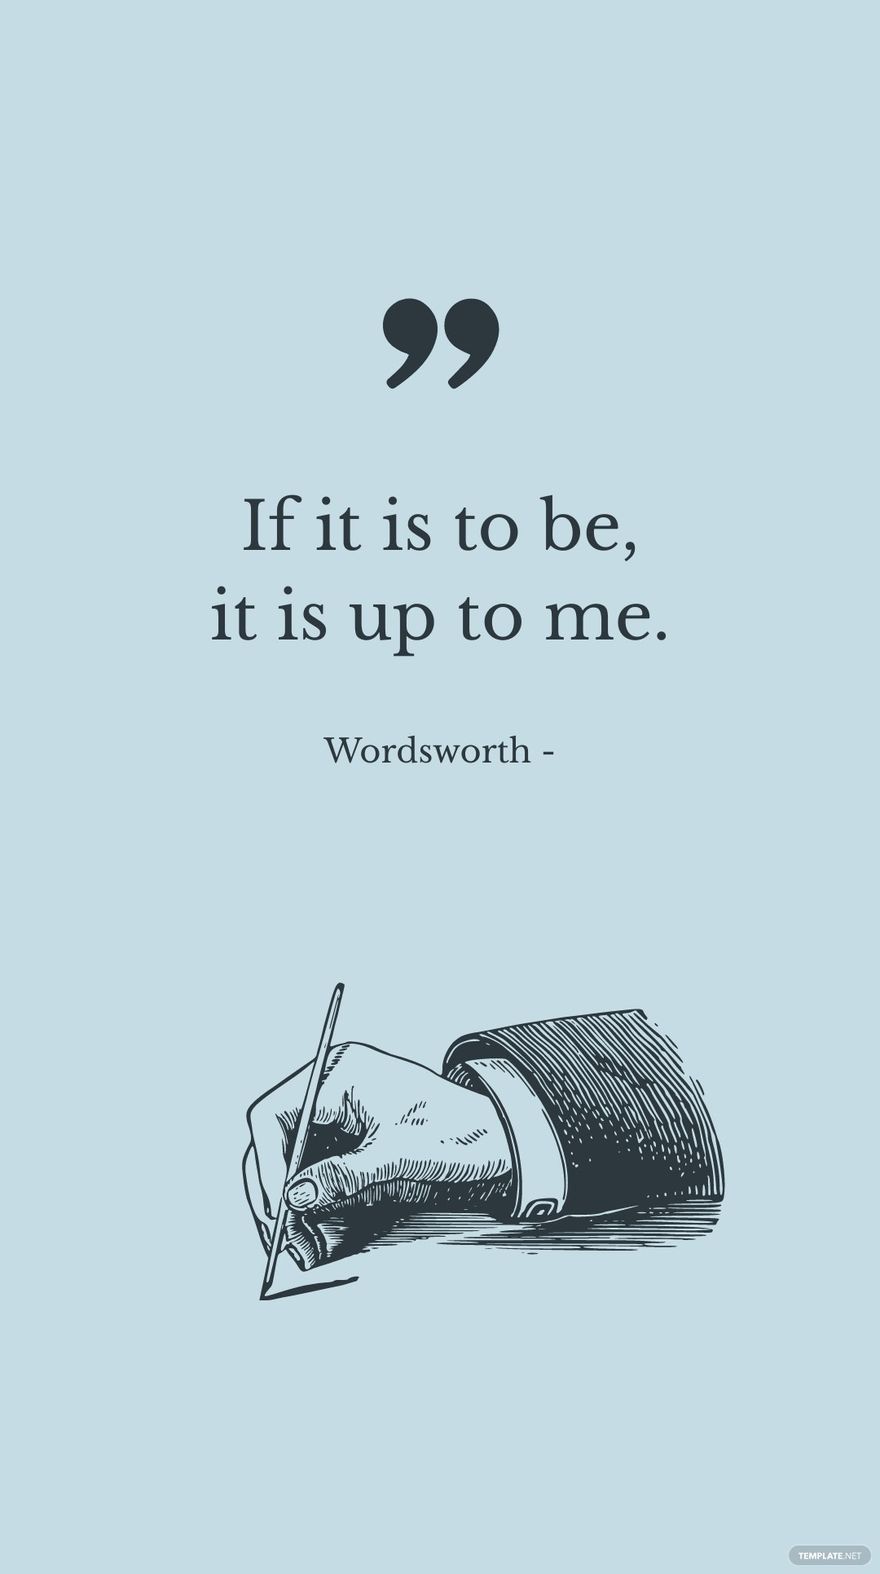 Wordsworth - If it is to be, it is up to me.